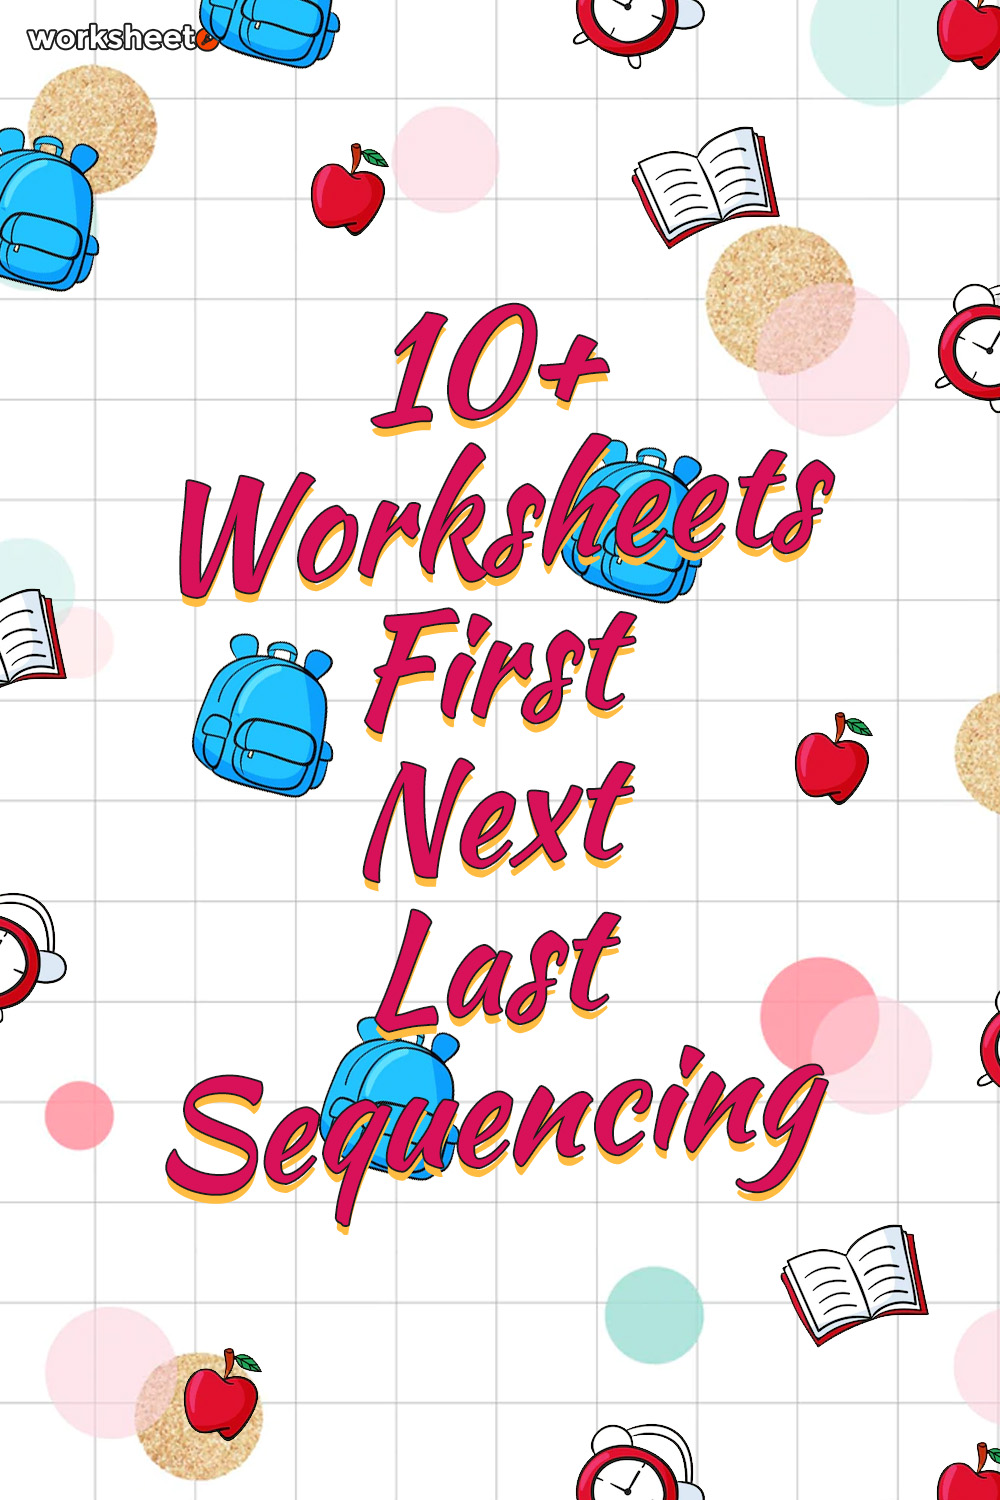 16 Images of Worksheets First Next Last Sequencing